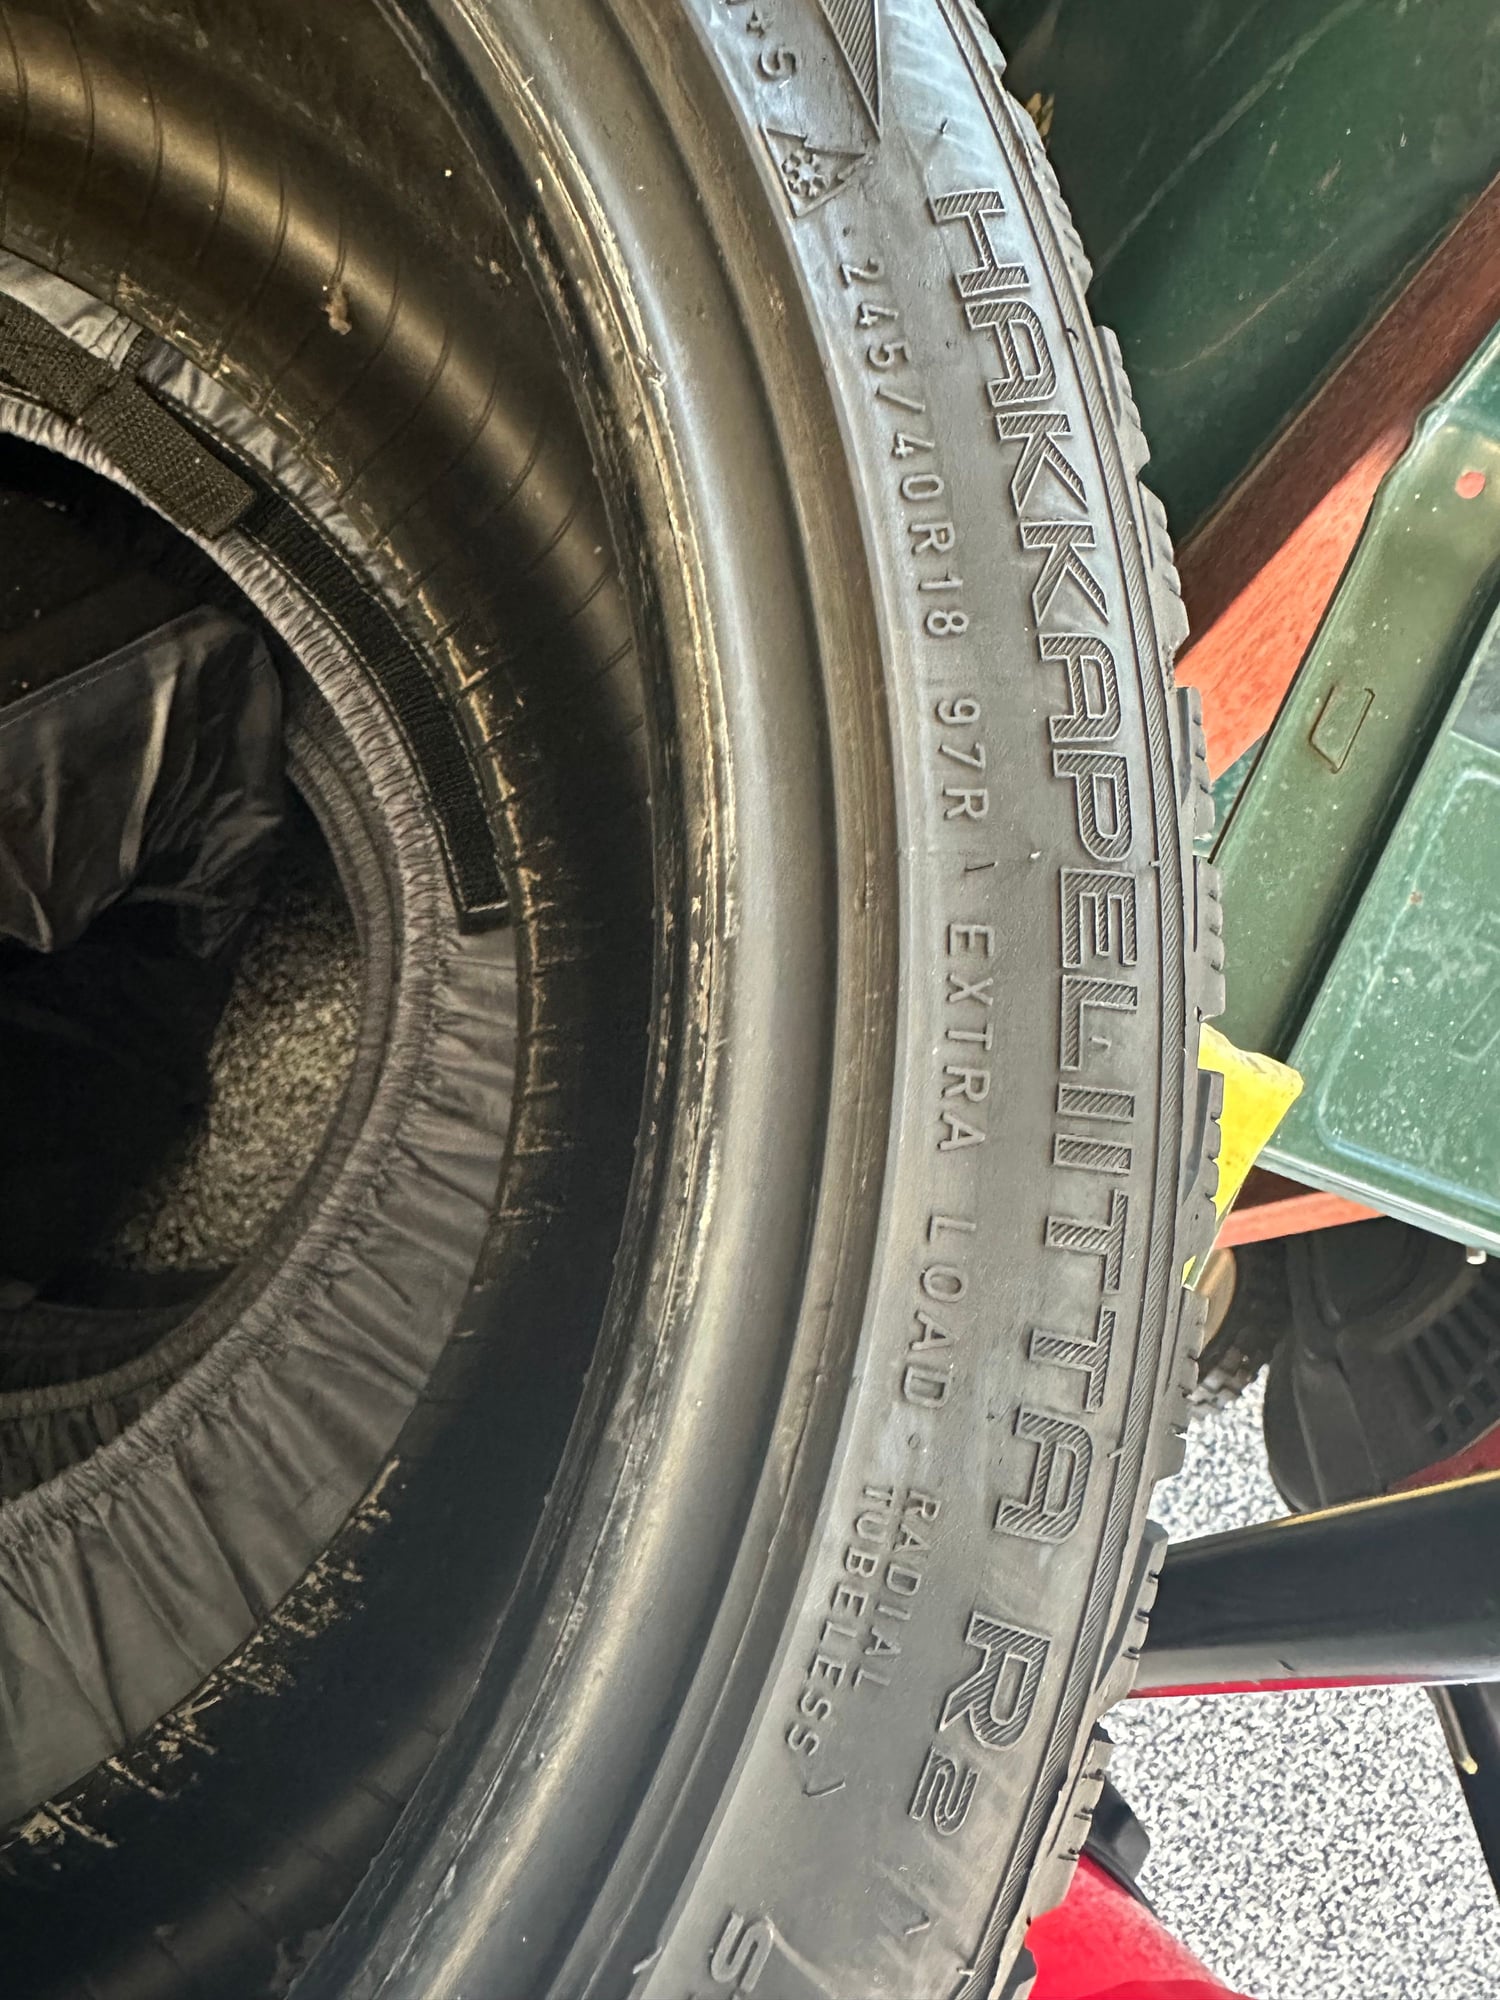 Wheels and Tires/Axles - 2IS Winter Tires - Nokian Hakkapeliitta r2 Set of 4 tires - Used - 2008 to 2013 Lexus IS350 - Mason, OH 45040, United States